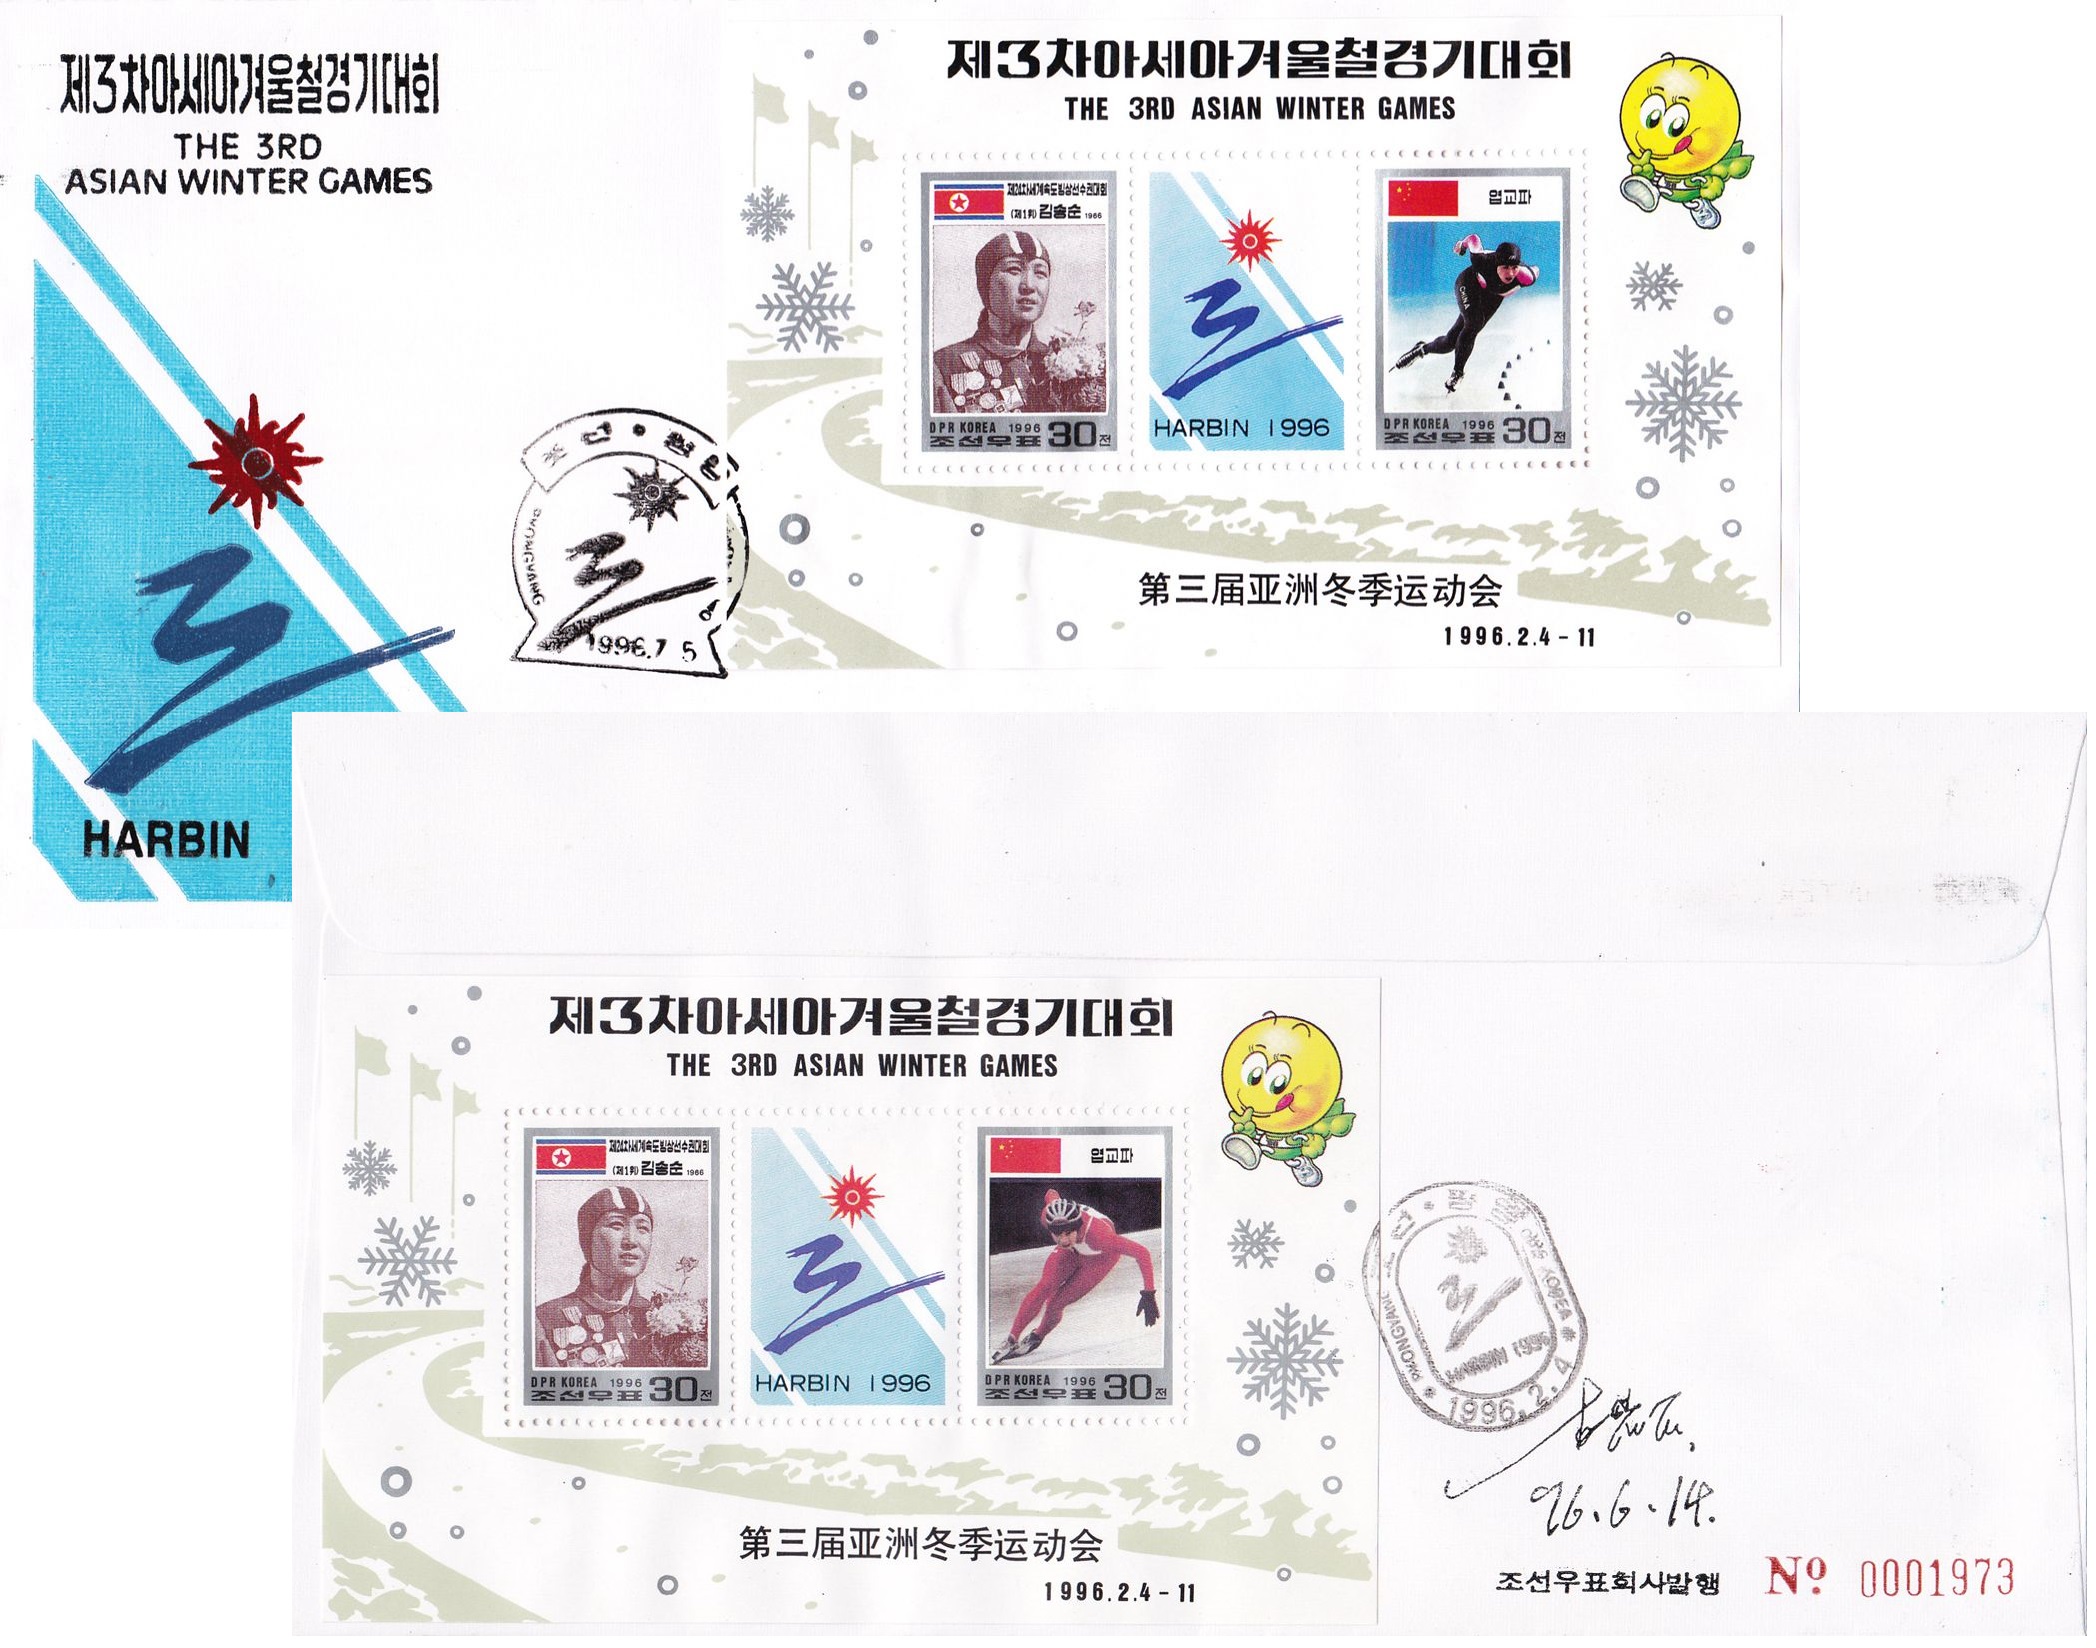 L9696, Korea FDC Covers "3rd Asian Winter Game", 1996 with Error